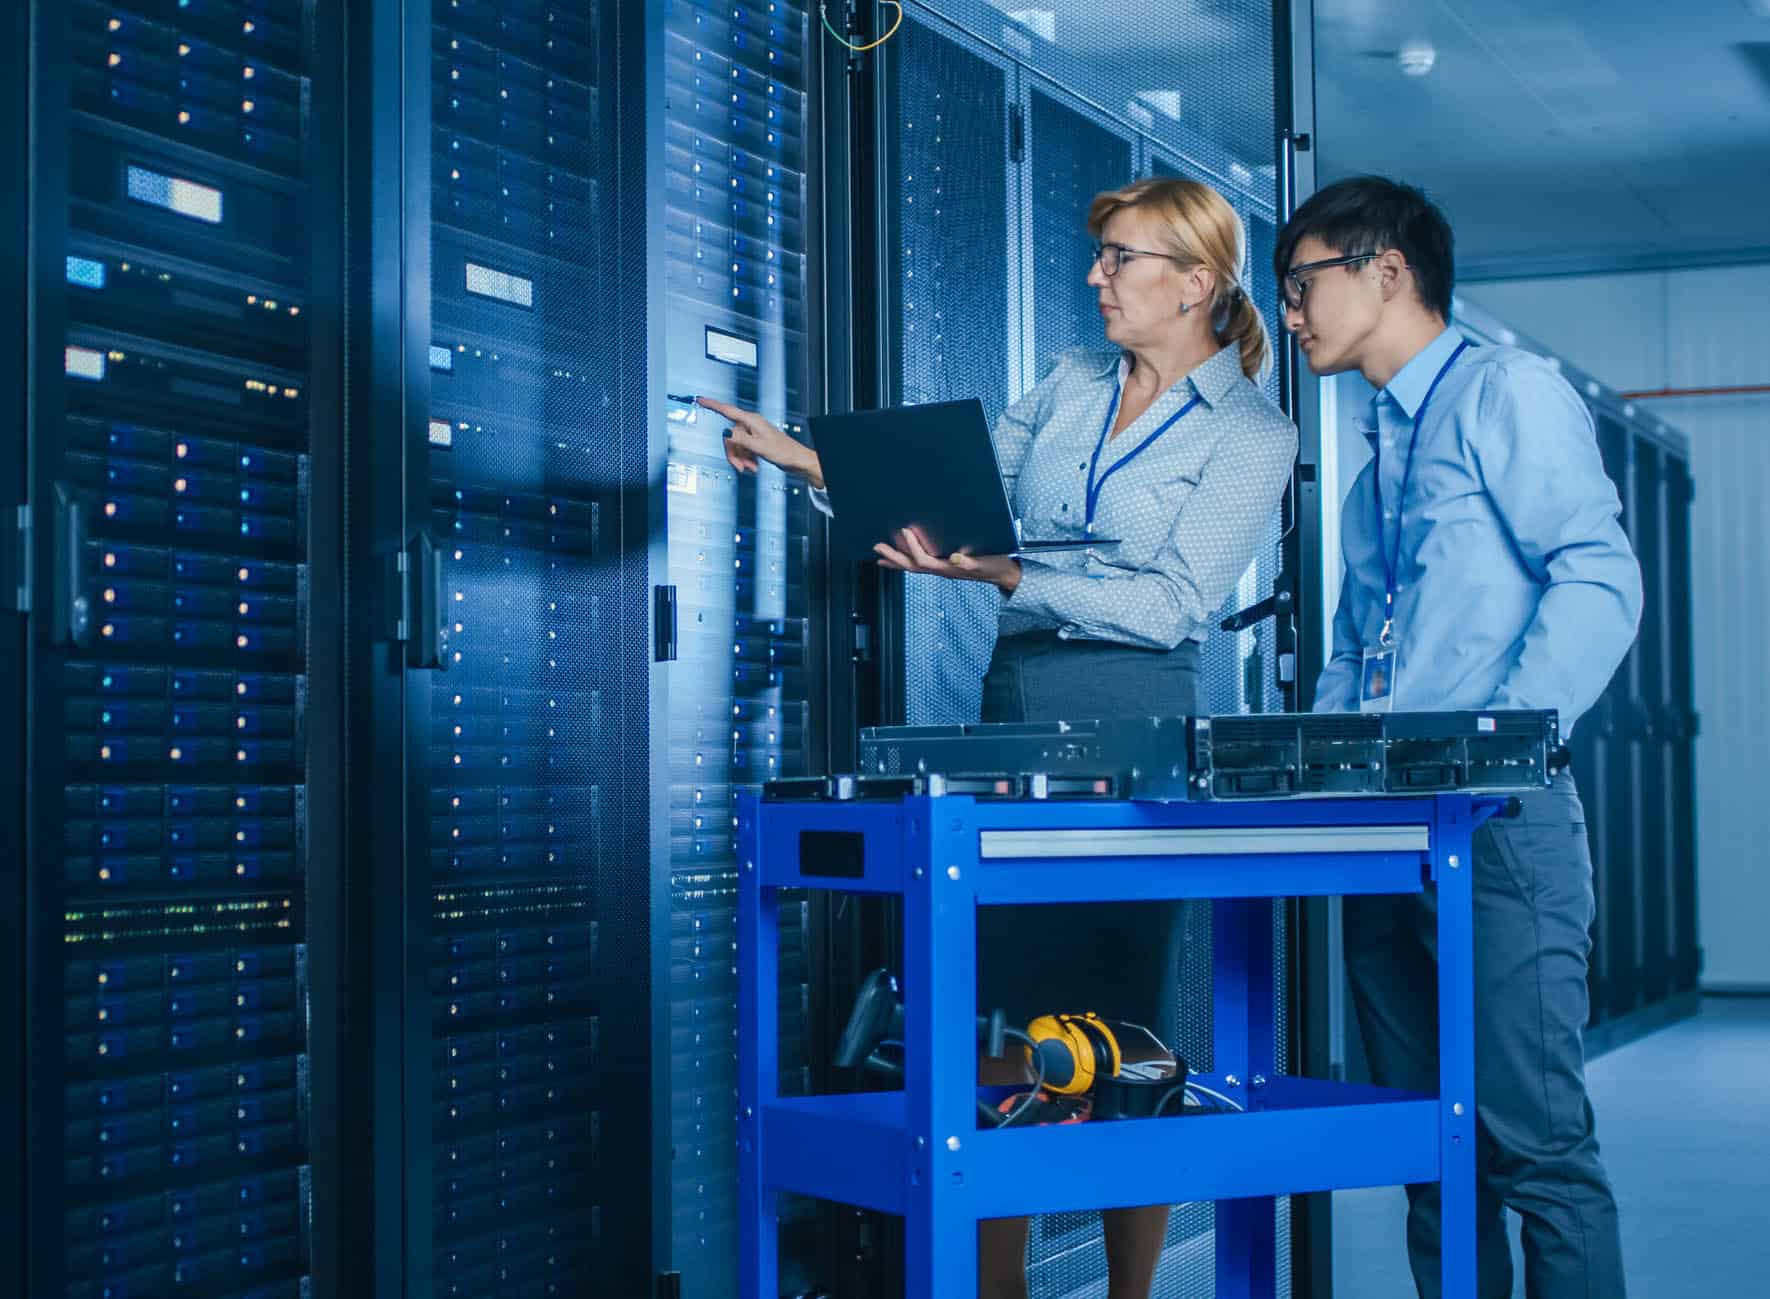 In the Modern Data Center: Engineer and IT Specialist Work with Server Racks, on a Pushcart Equipment for Installing New Hardware. Specialists Doing Maintenance and Diagnostics of the Database.